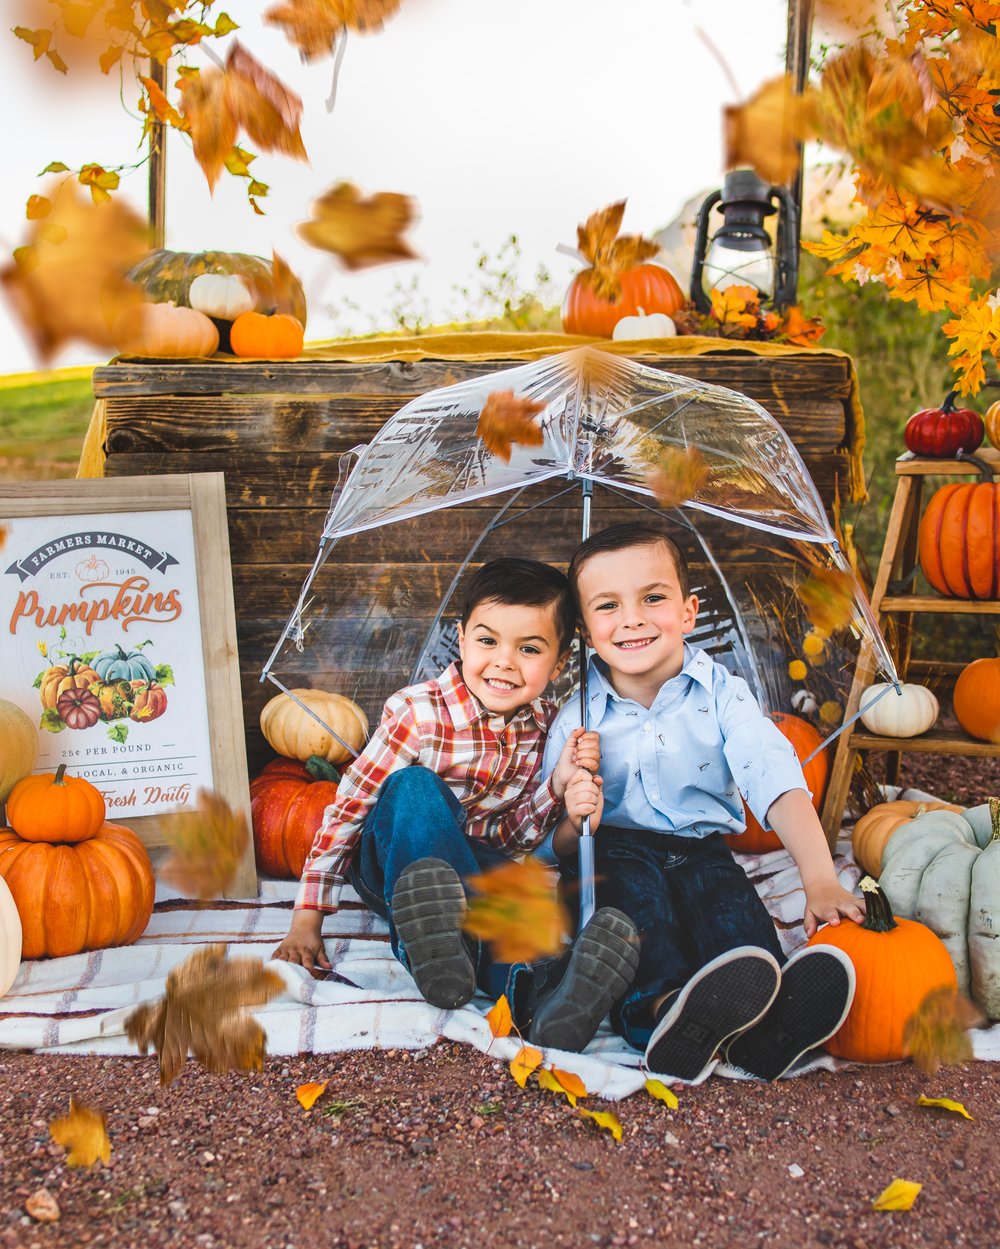 Image of Fall Family Mini and Kids pumpkin patch 